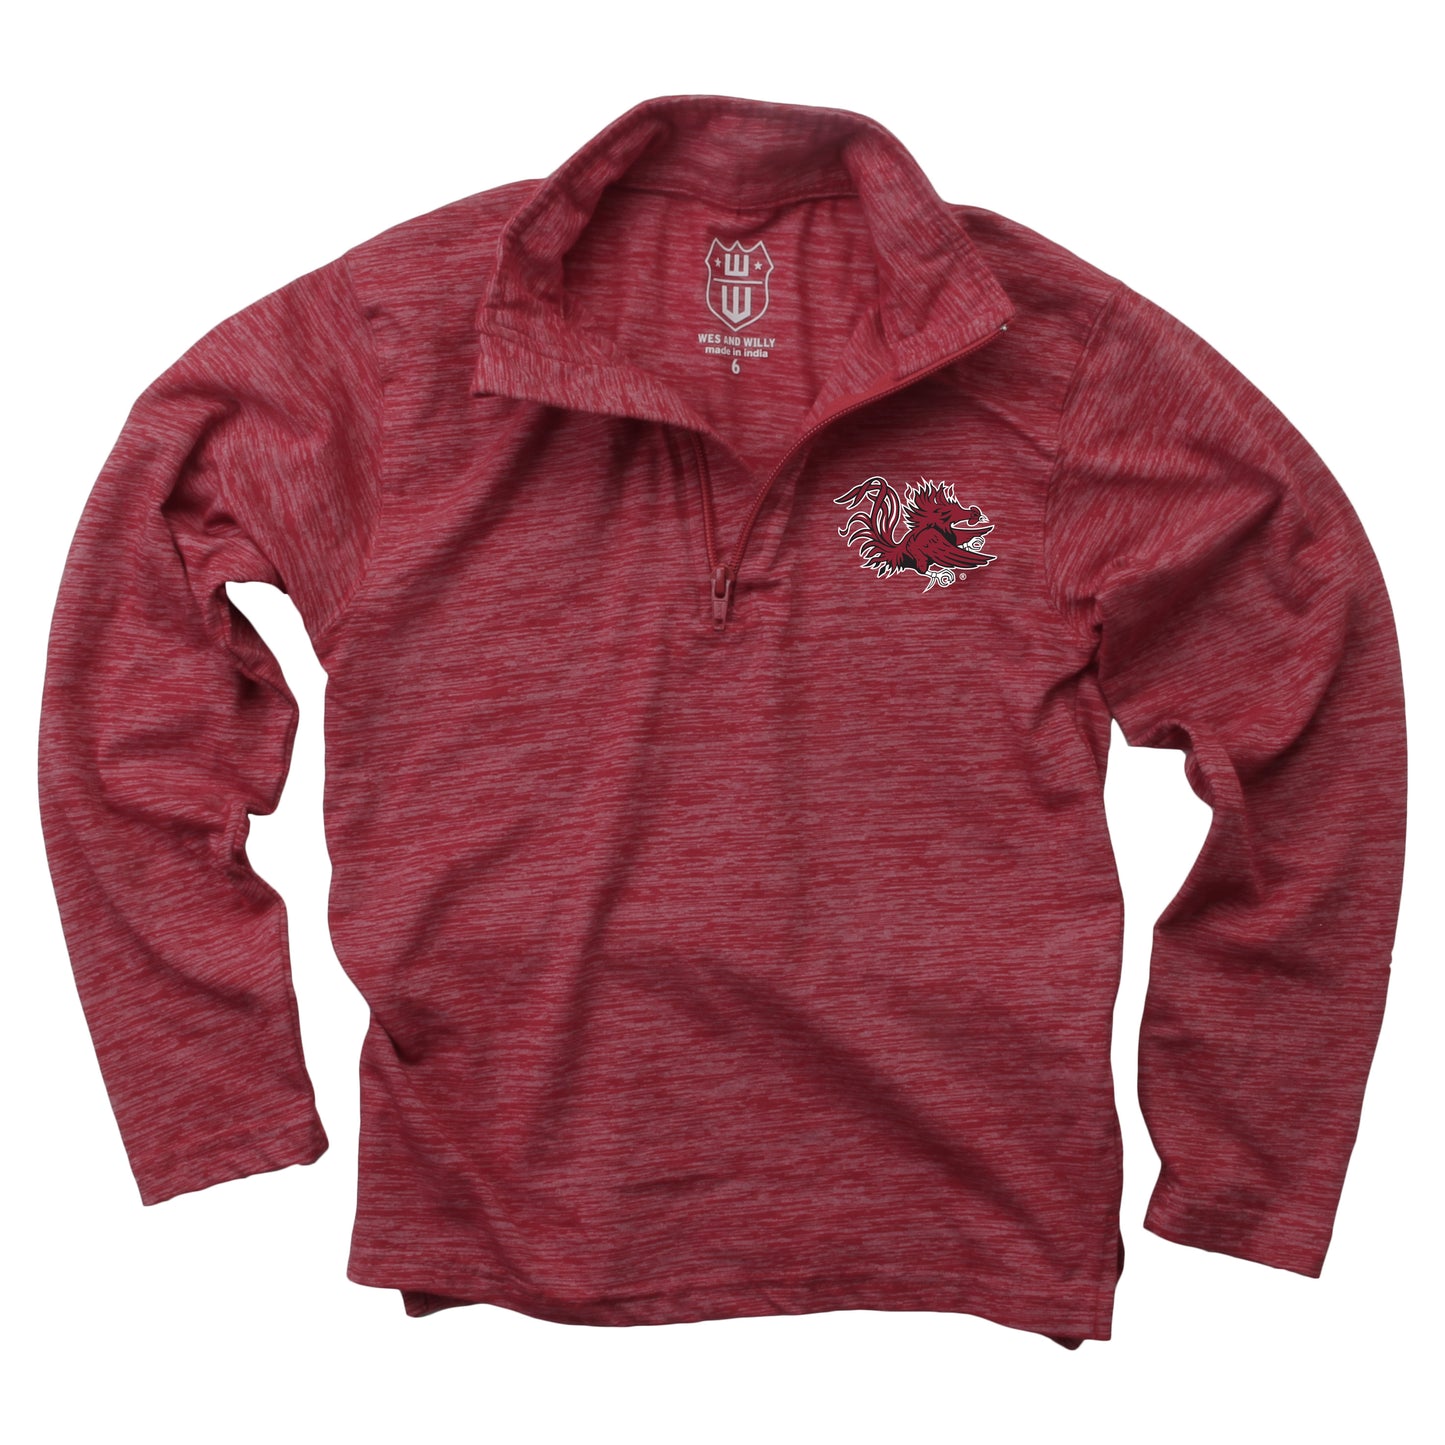 South Carolina Gamecocks Wes and Willy Youth Boys Cloudy Yarn Long Sleeve College Quarter Zip - Red